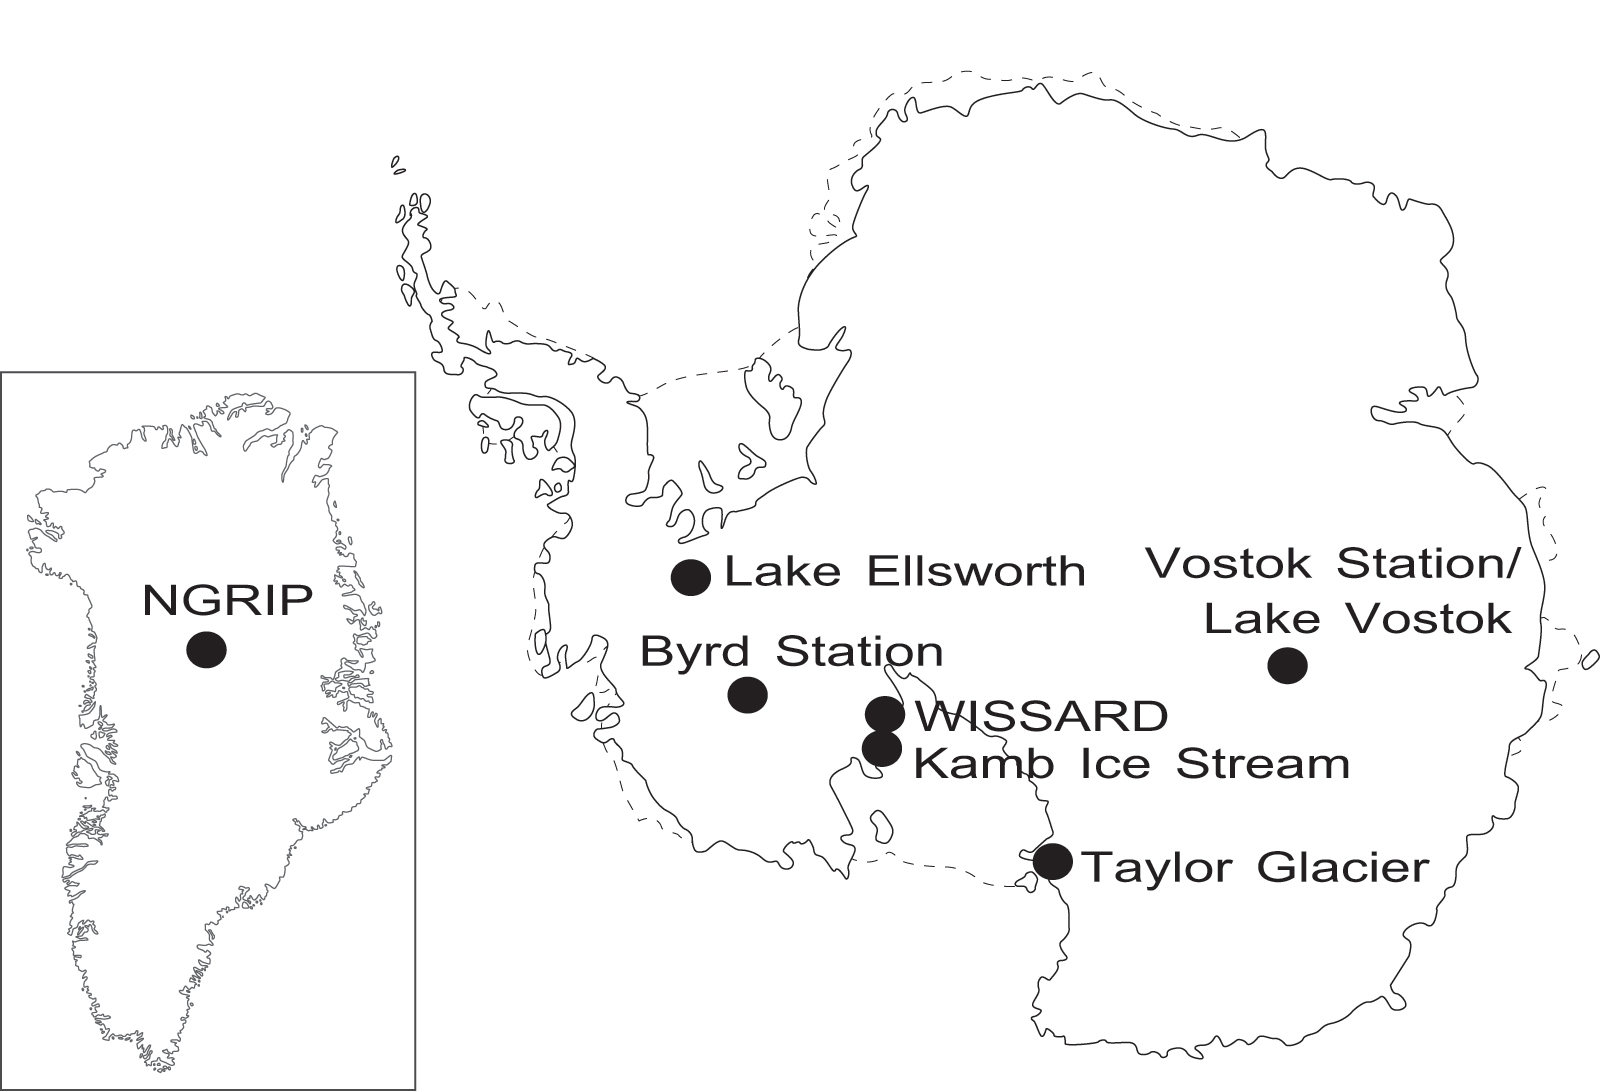 Map of Greenland (inset at left) and Antarctica showing locations mentioned in the text